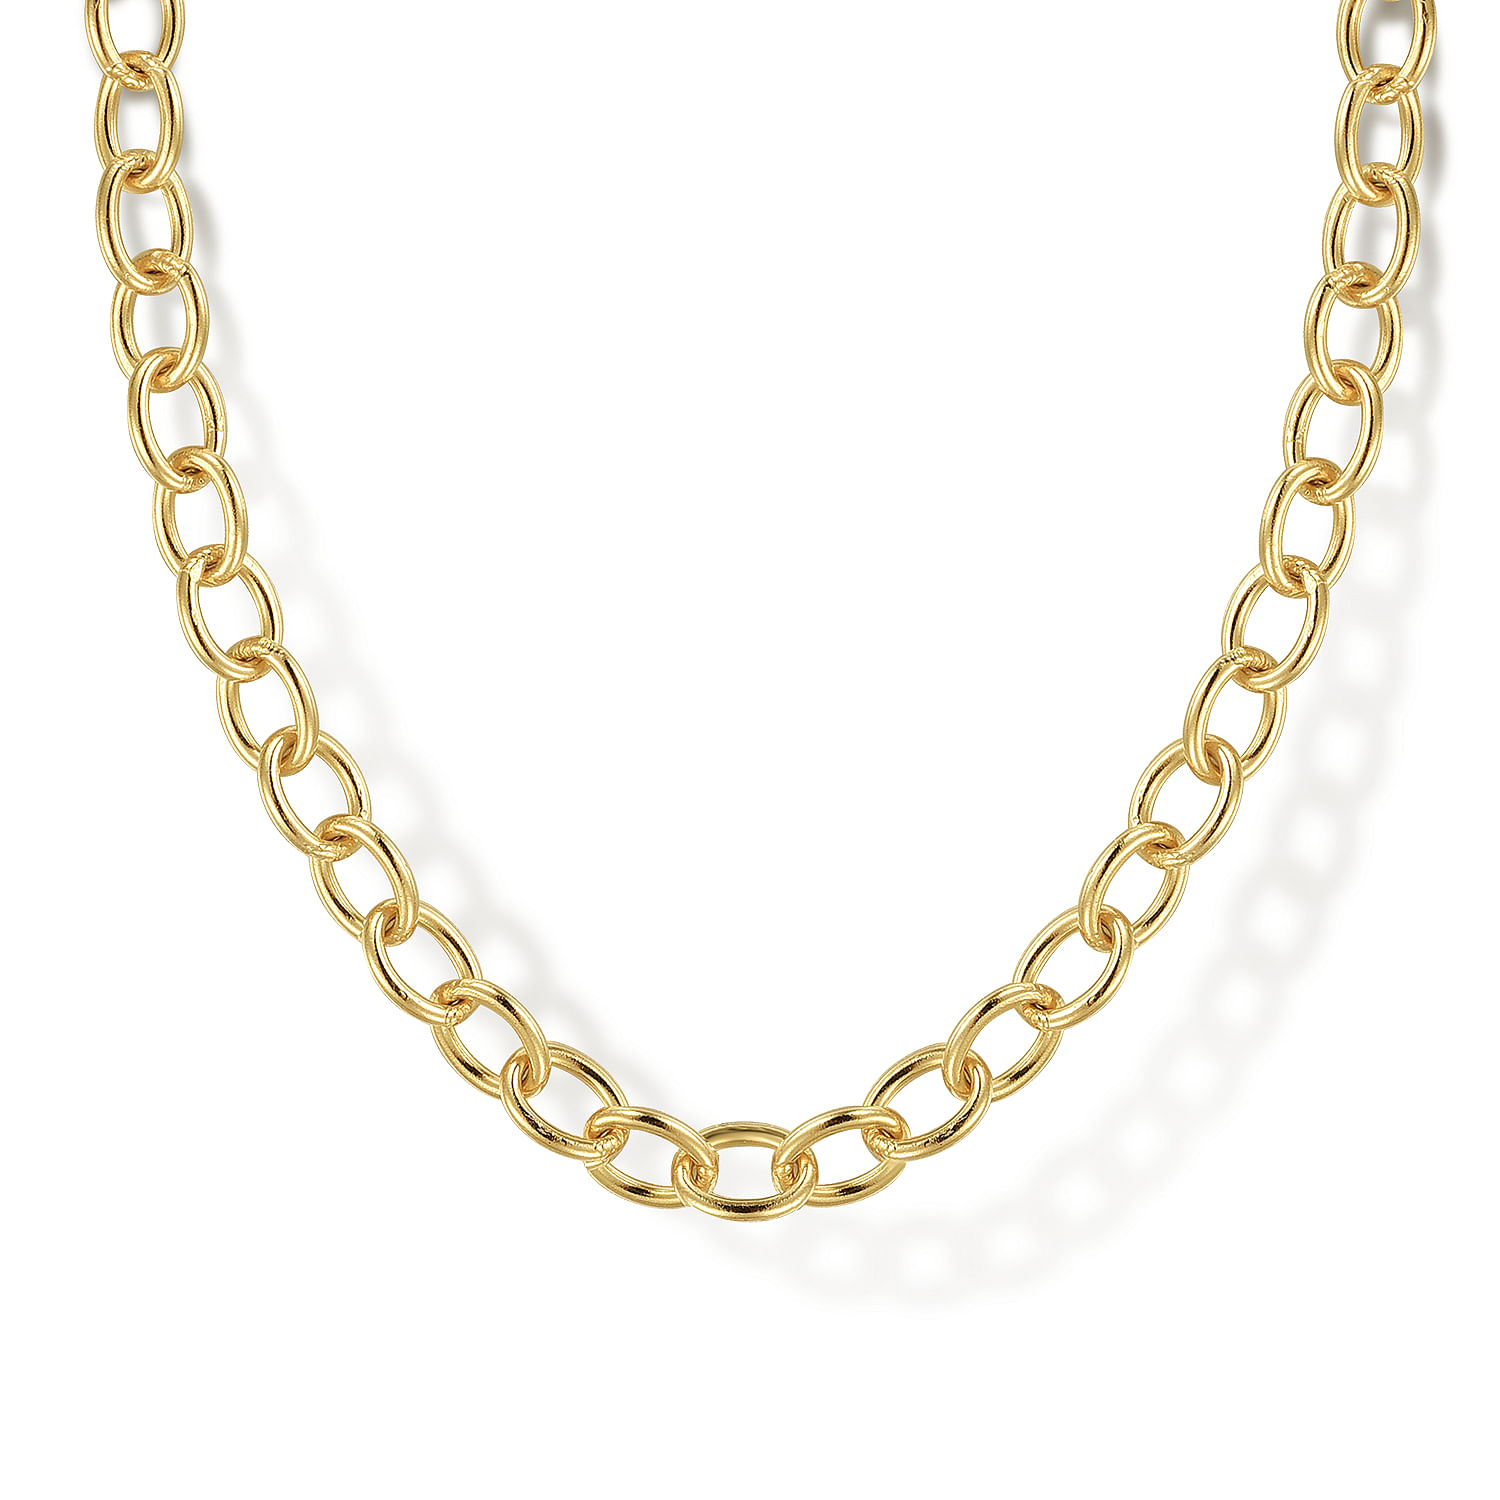 32 inch 14K Yellow Gold Necklace